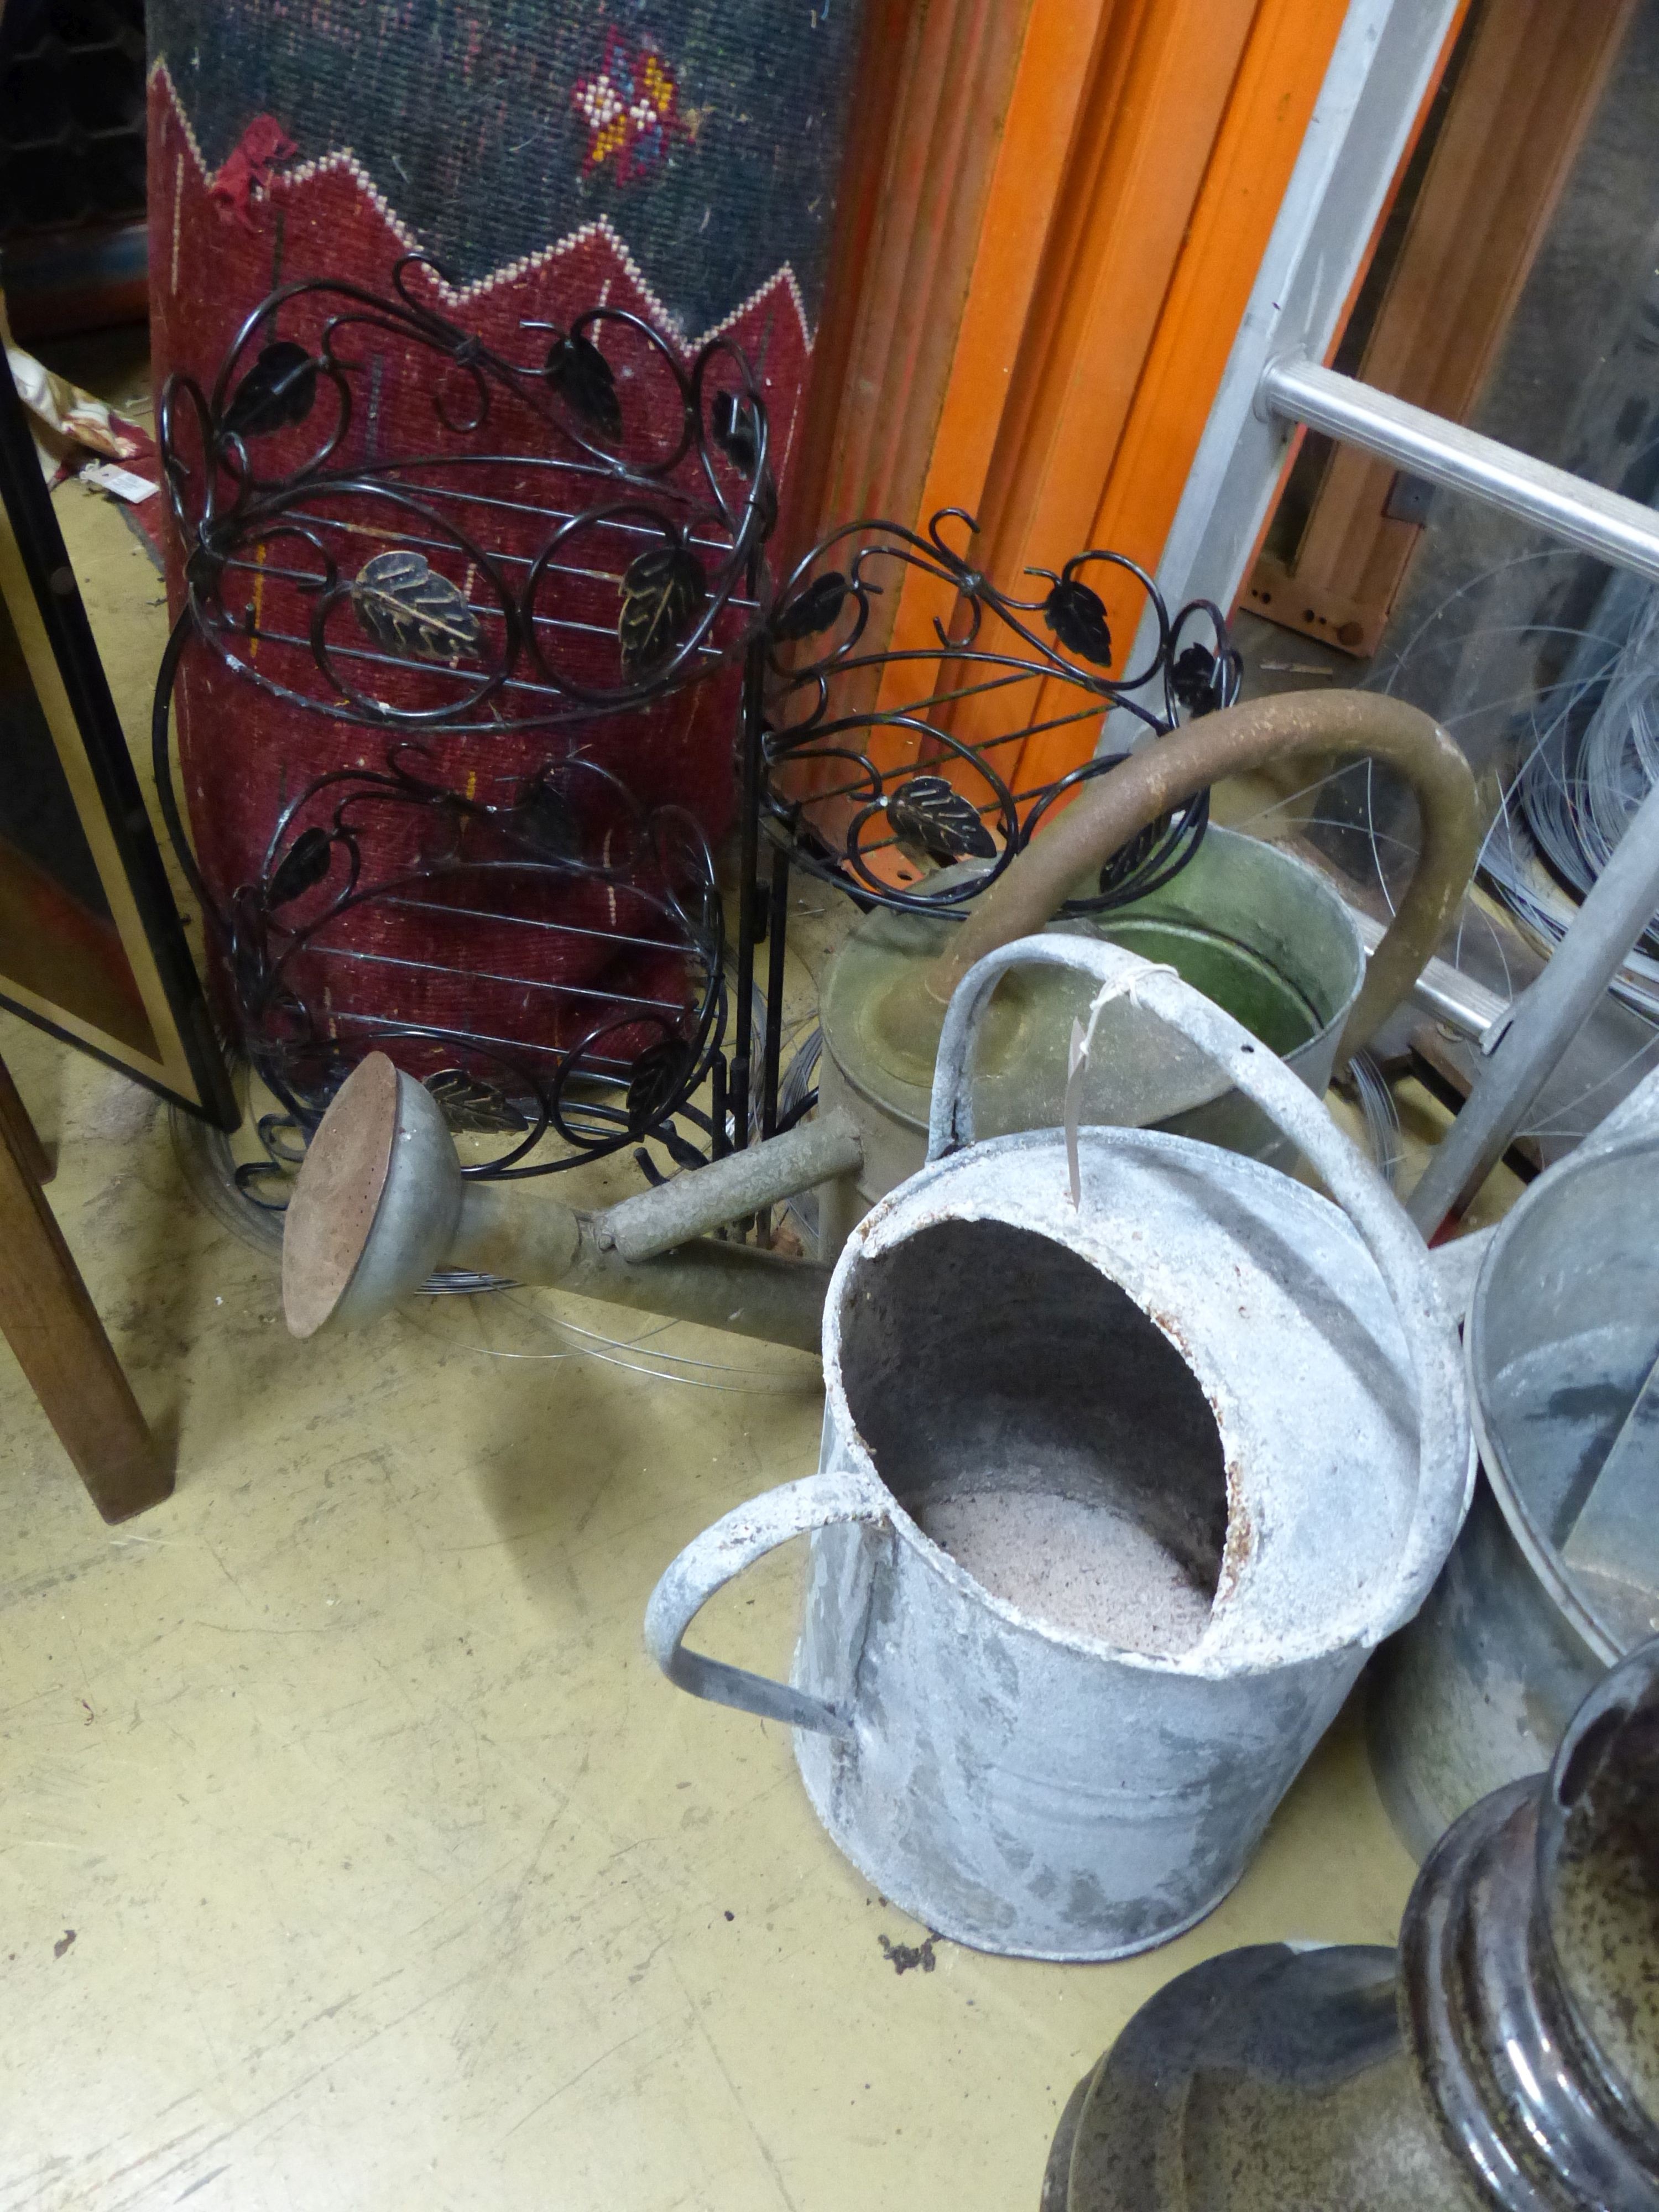 Assorted galvanized watering cans and assorted other metalware.